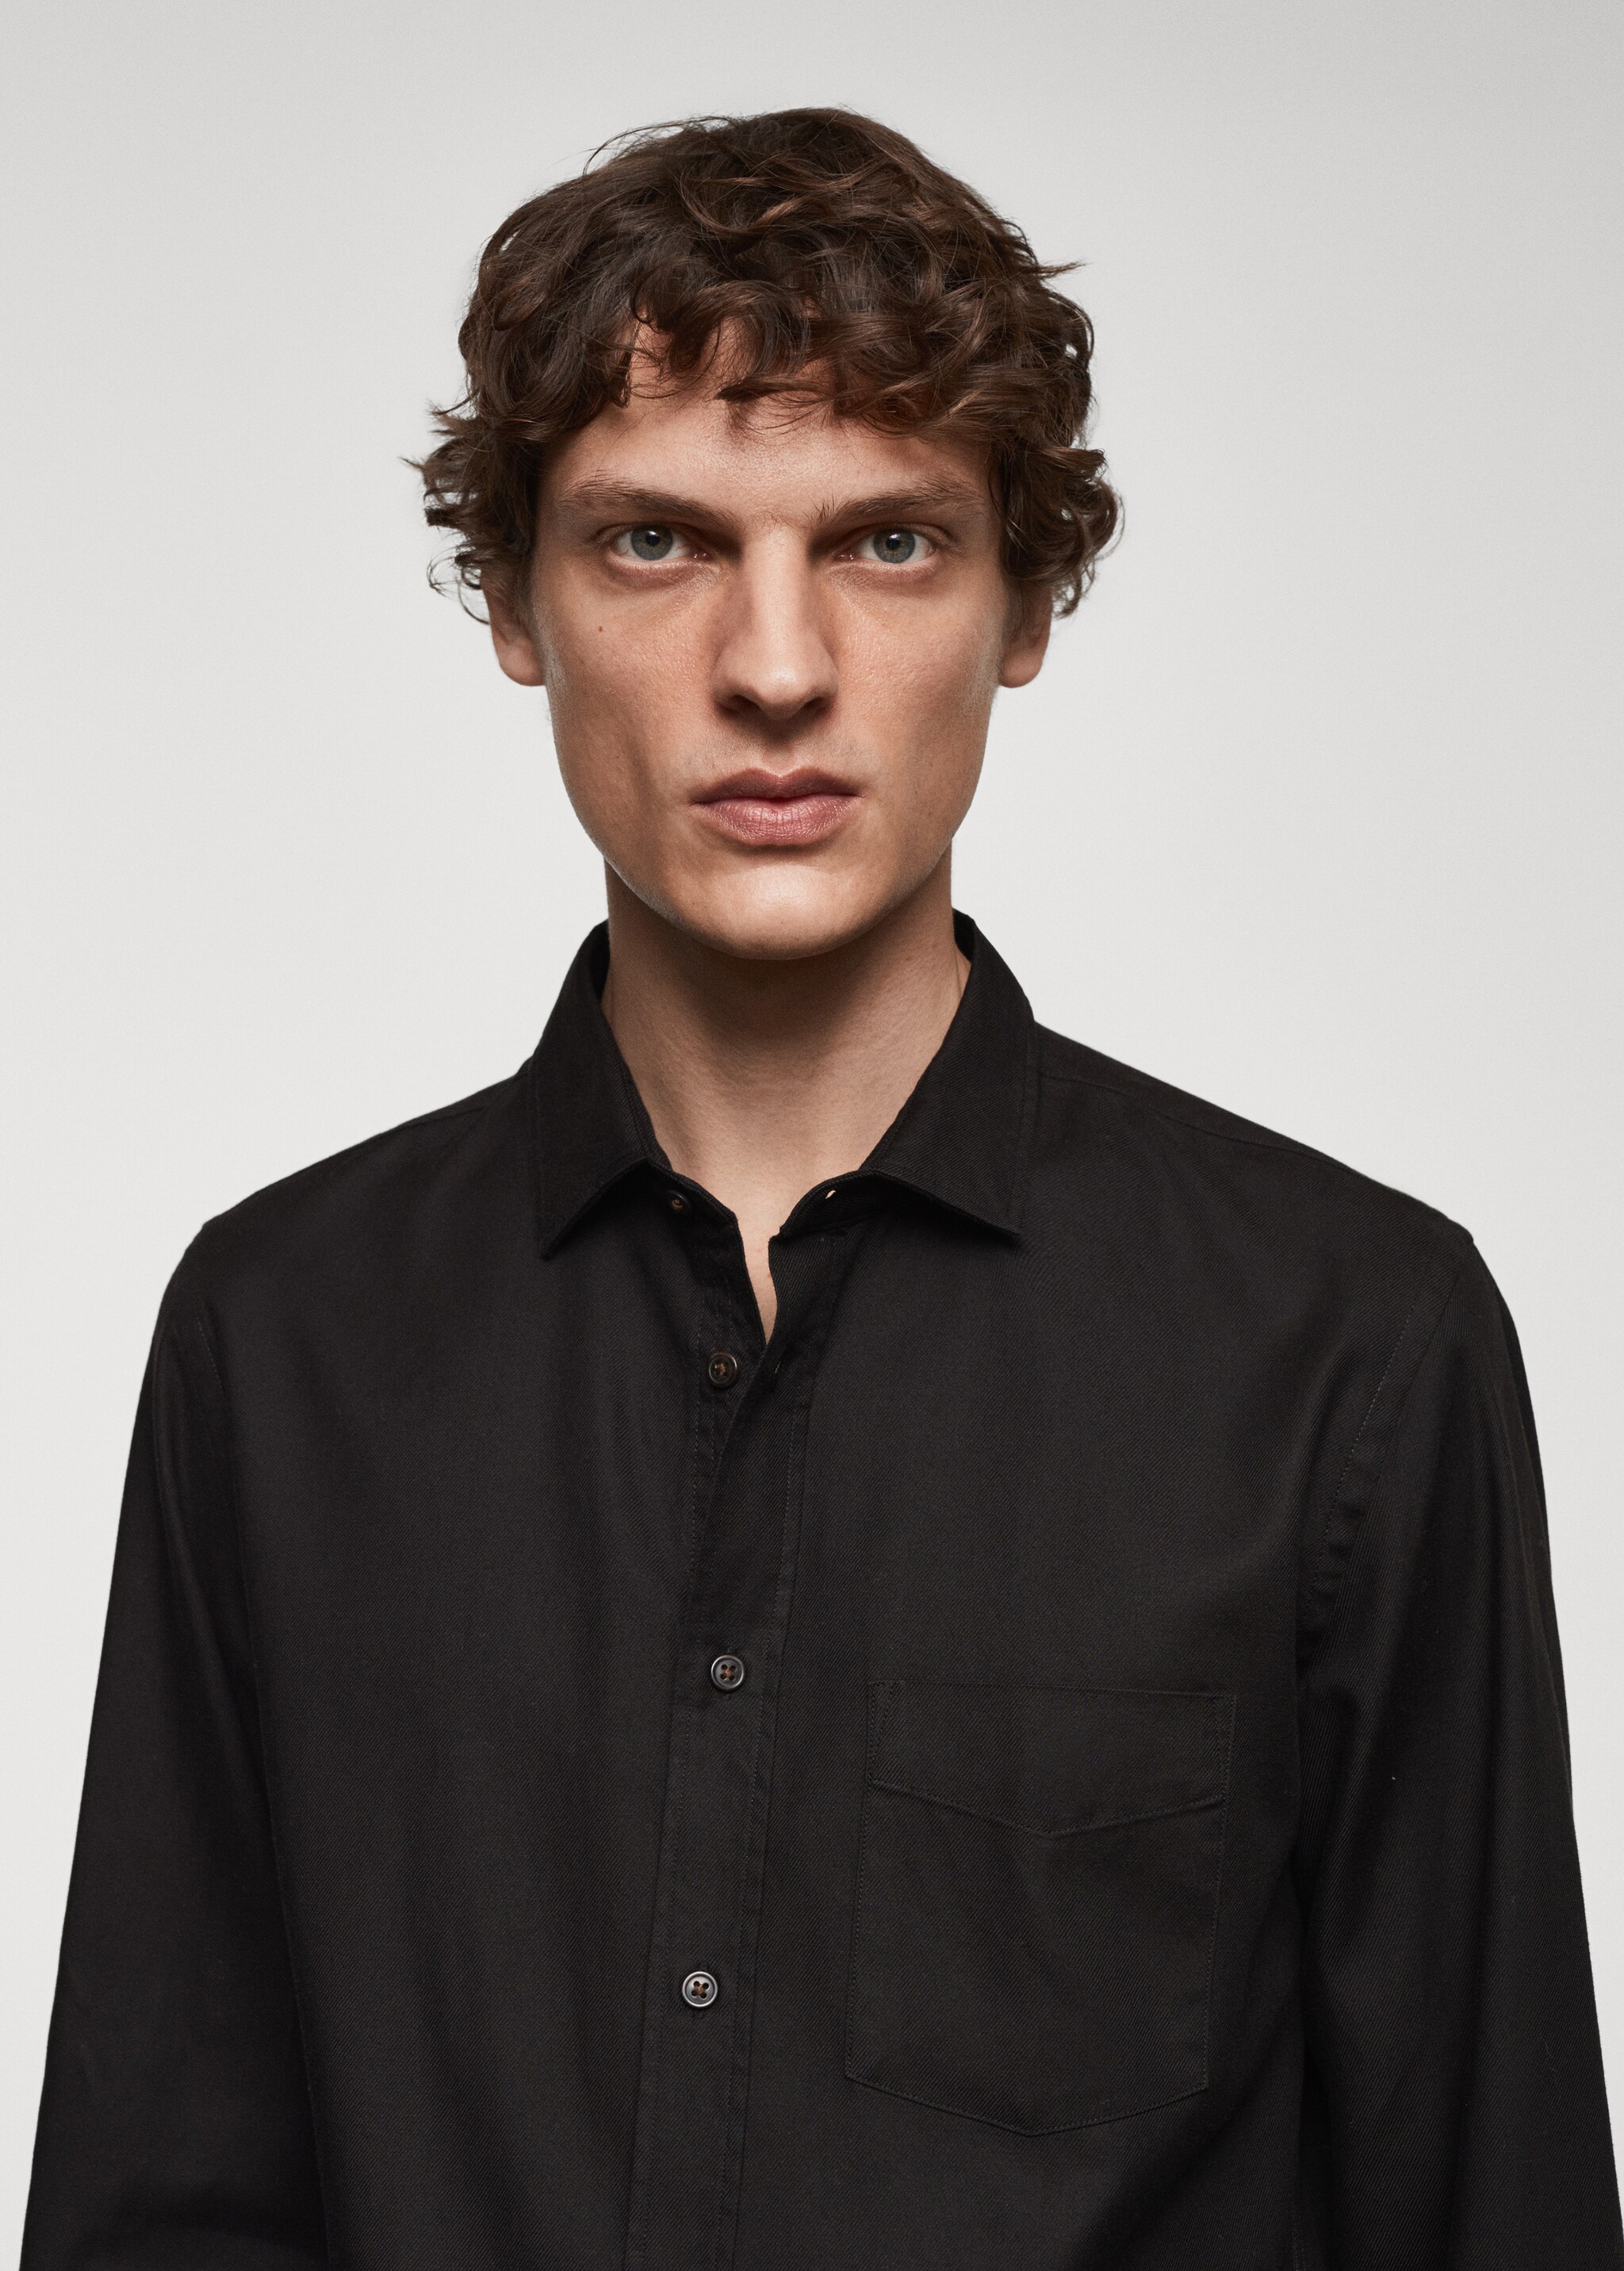 Brushed cotton twill shirt - Details of the article 1